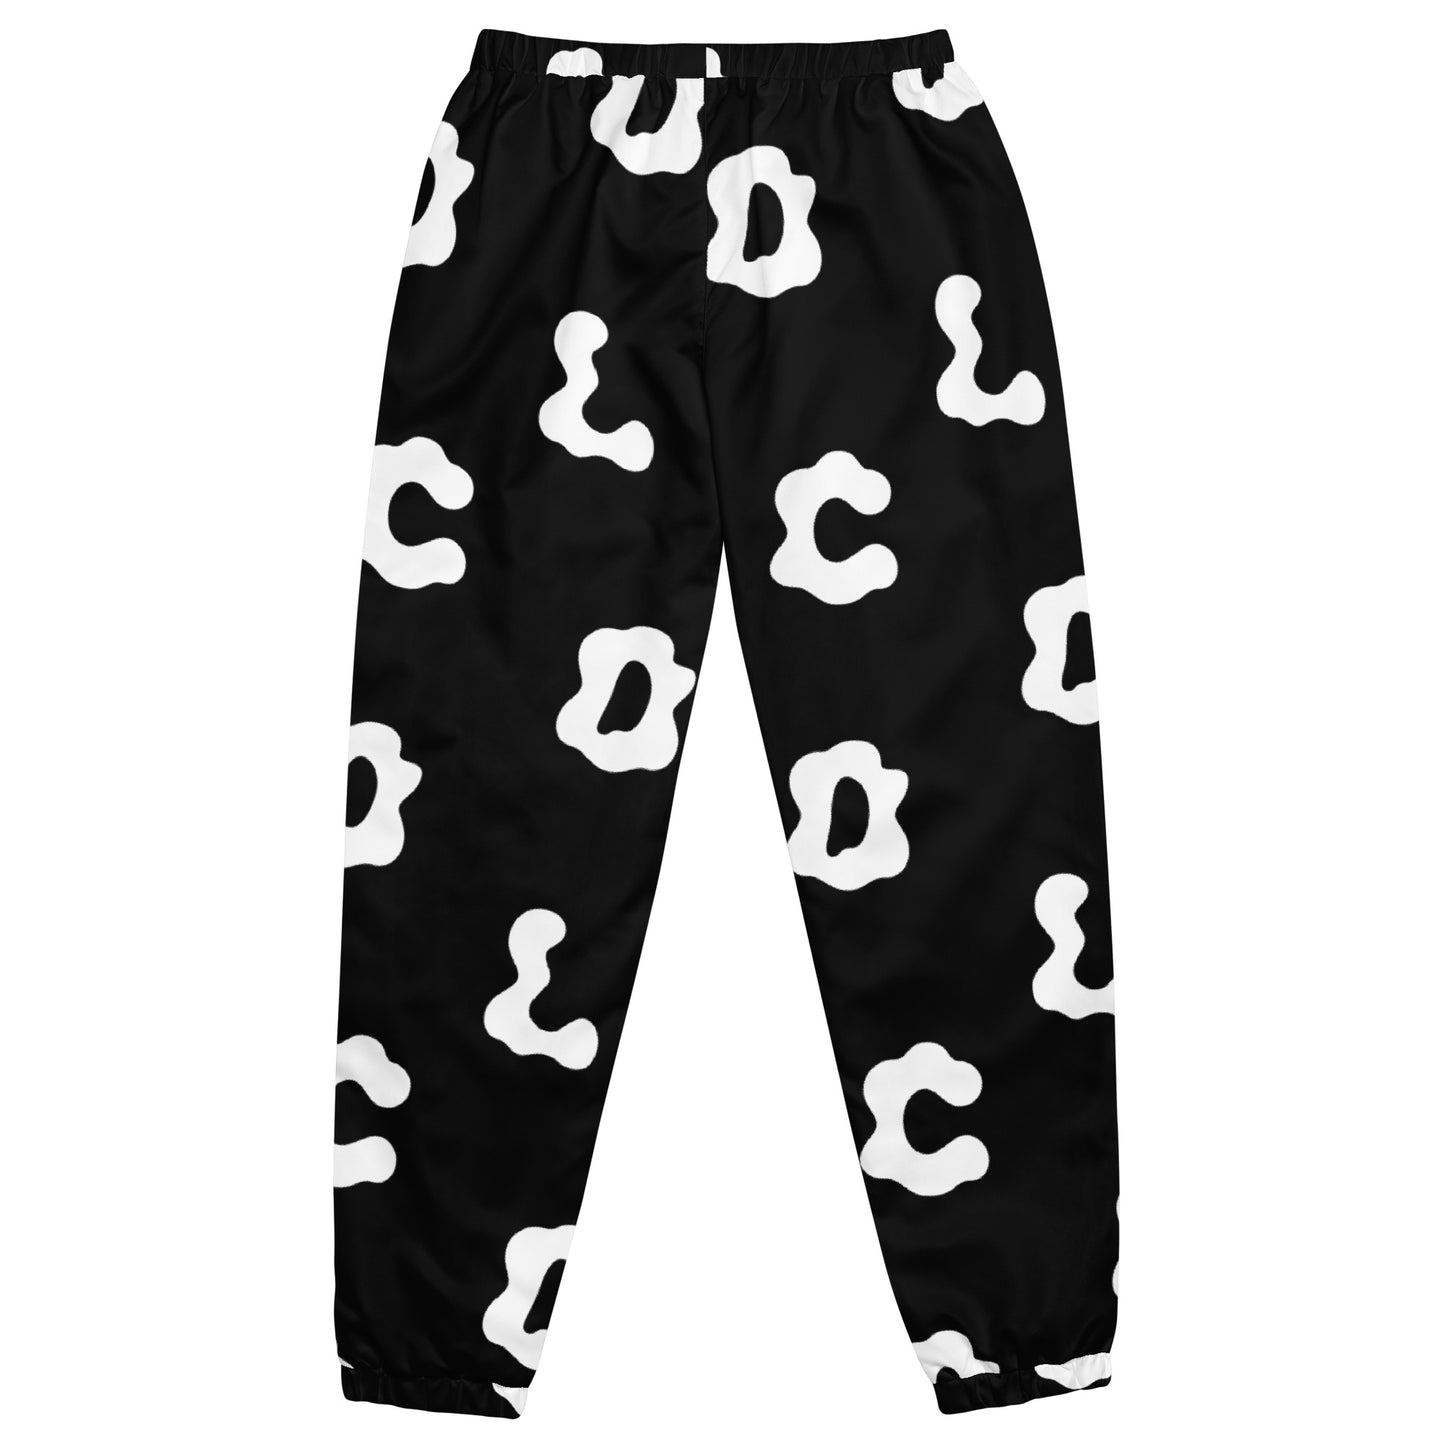 Black track pant with white lettering all over